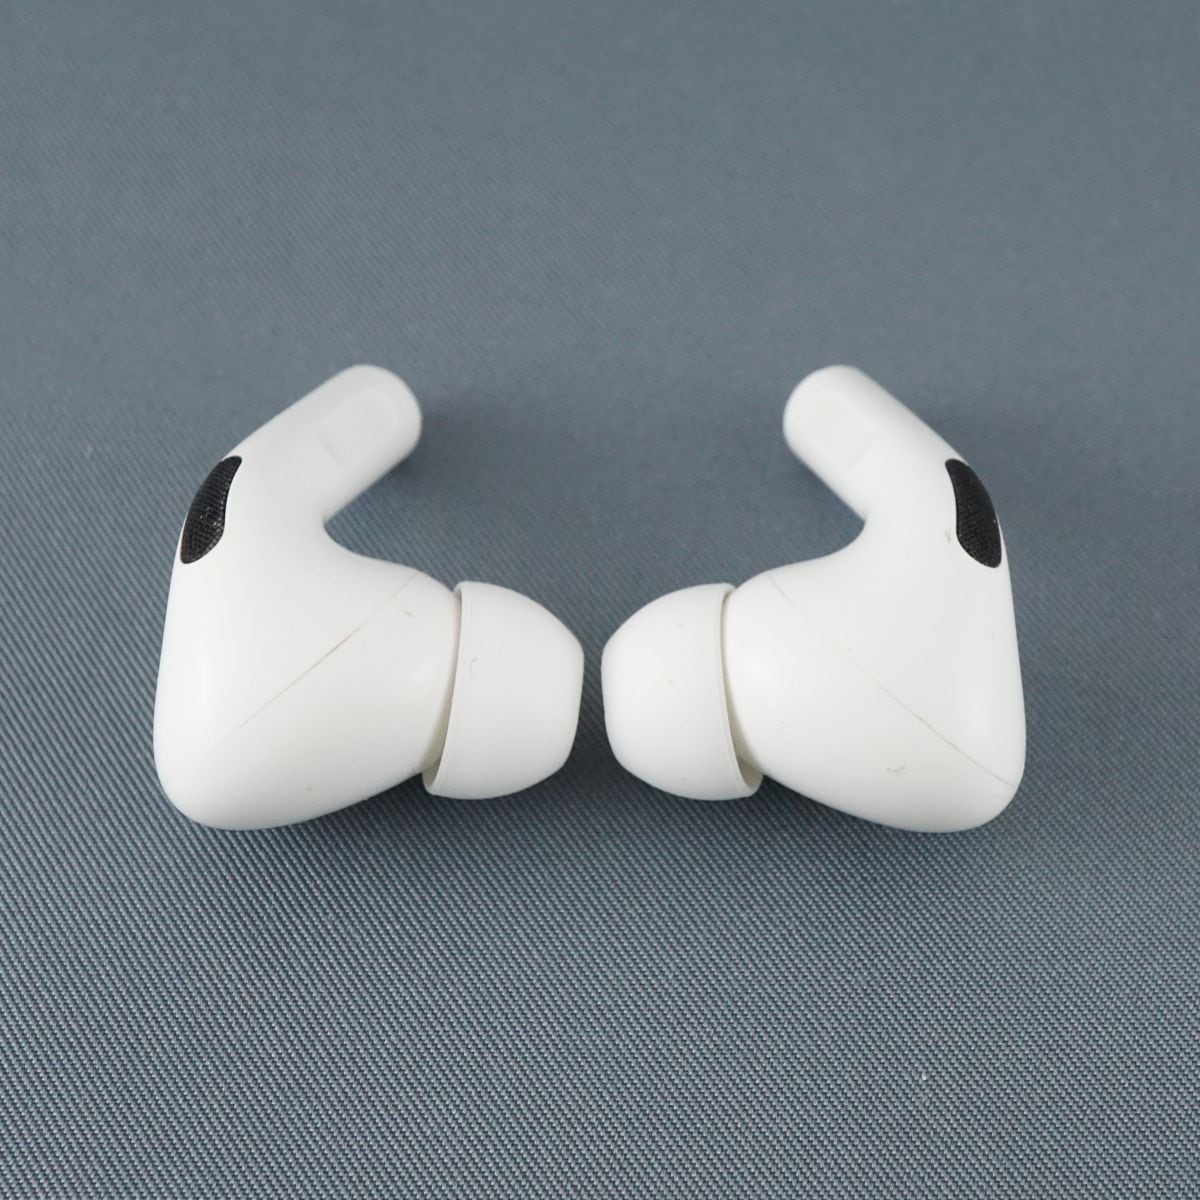 Apple AirPods Pro MagSafe充電ケース付 USED美品 第一世代 ワイヤレス ...